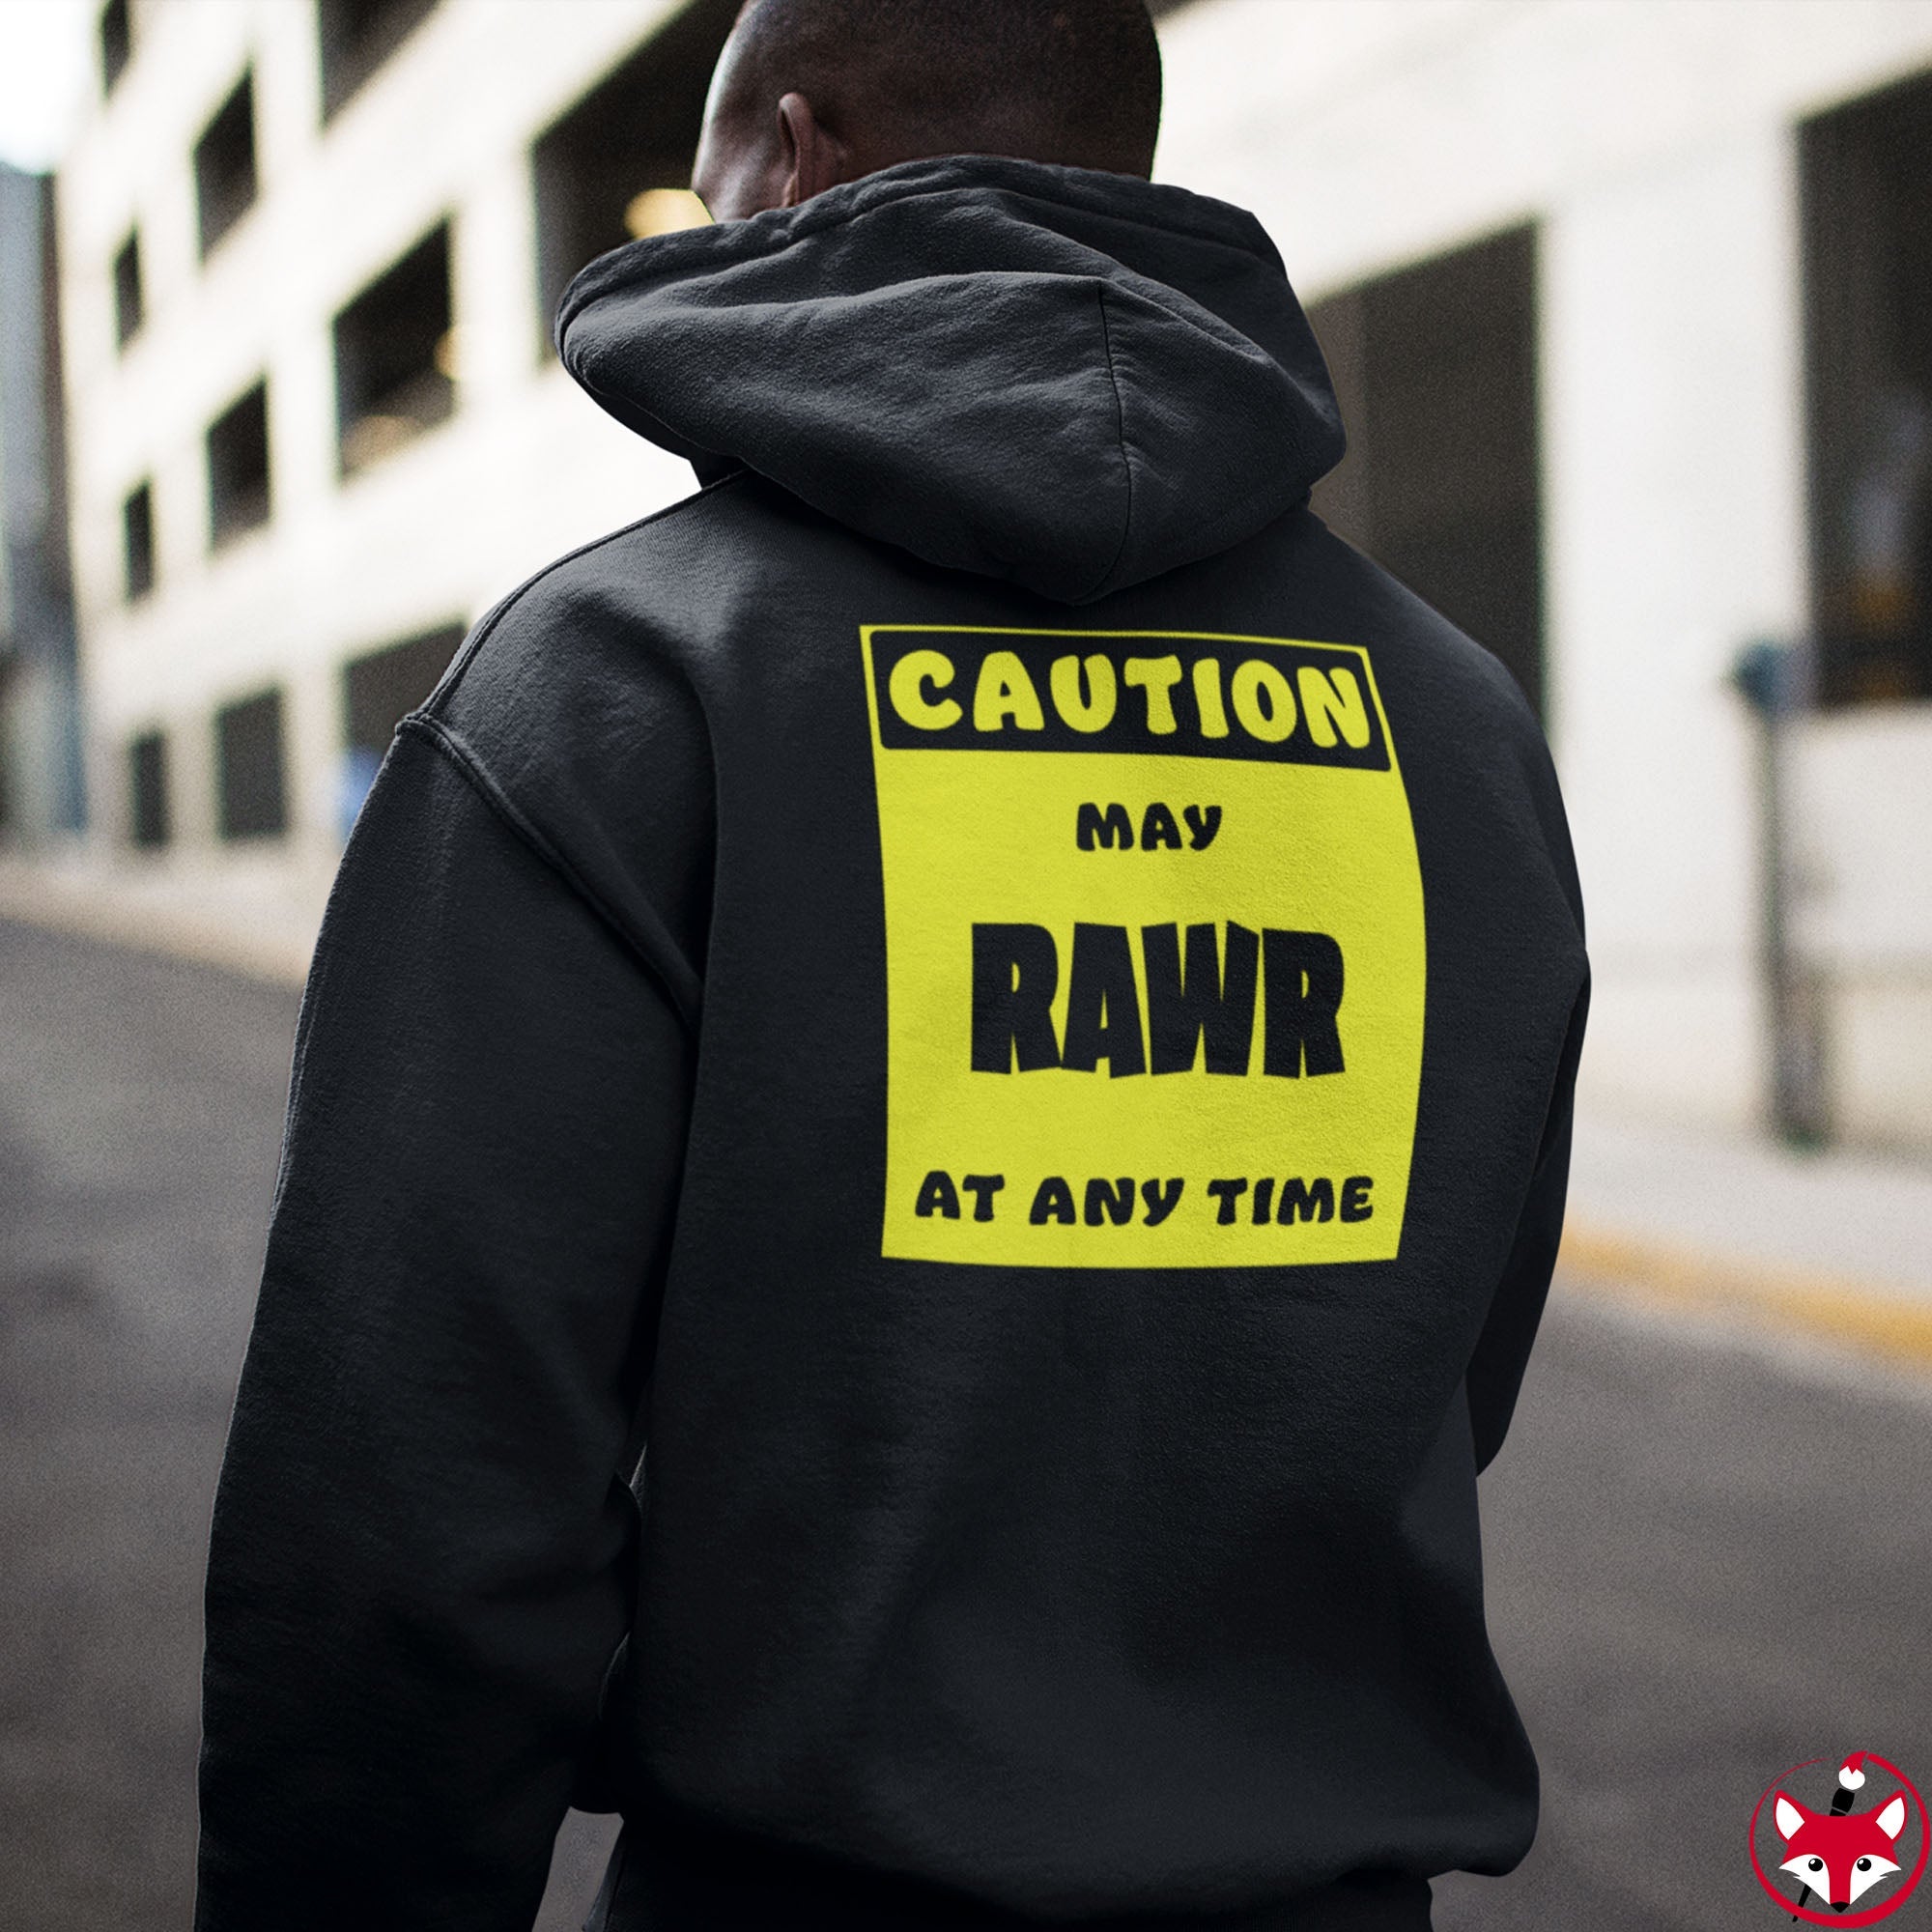 CAUTION! May RAWR at any time! - Hoodie Hoodie AFLT-Whootorca 